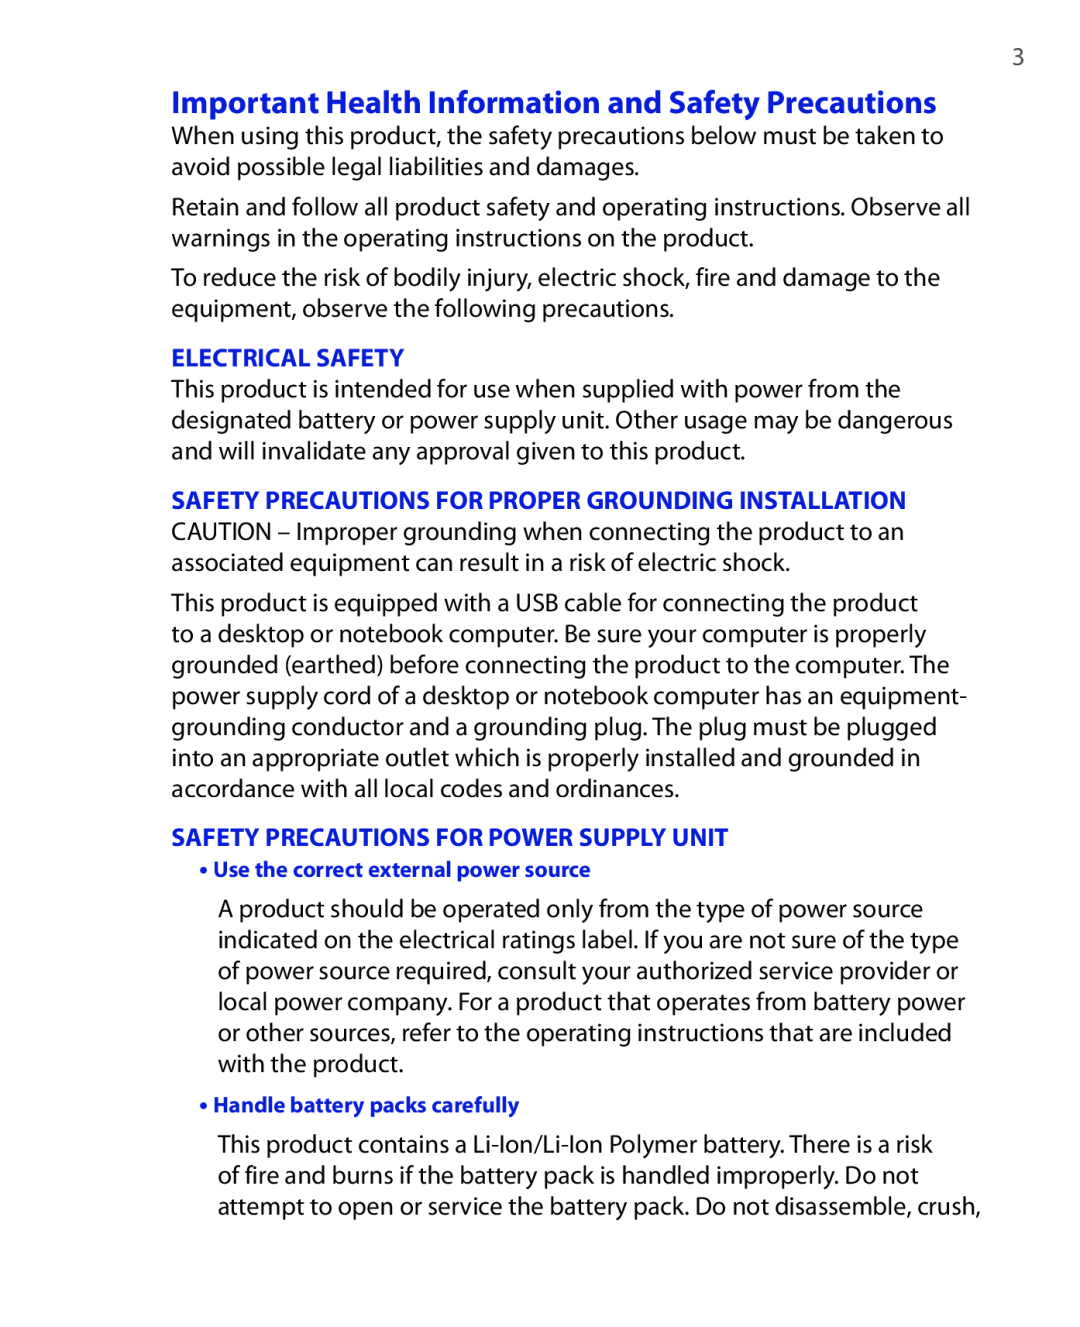 HTC HTC S621 user manual Important Health Information and Safety Precautions, Electrical Safety 